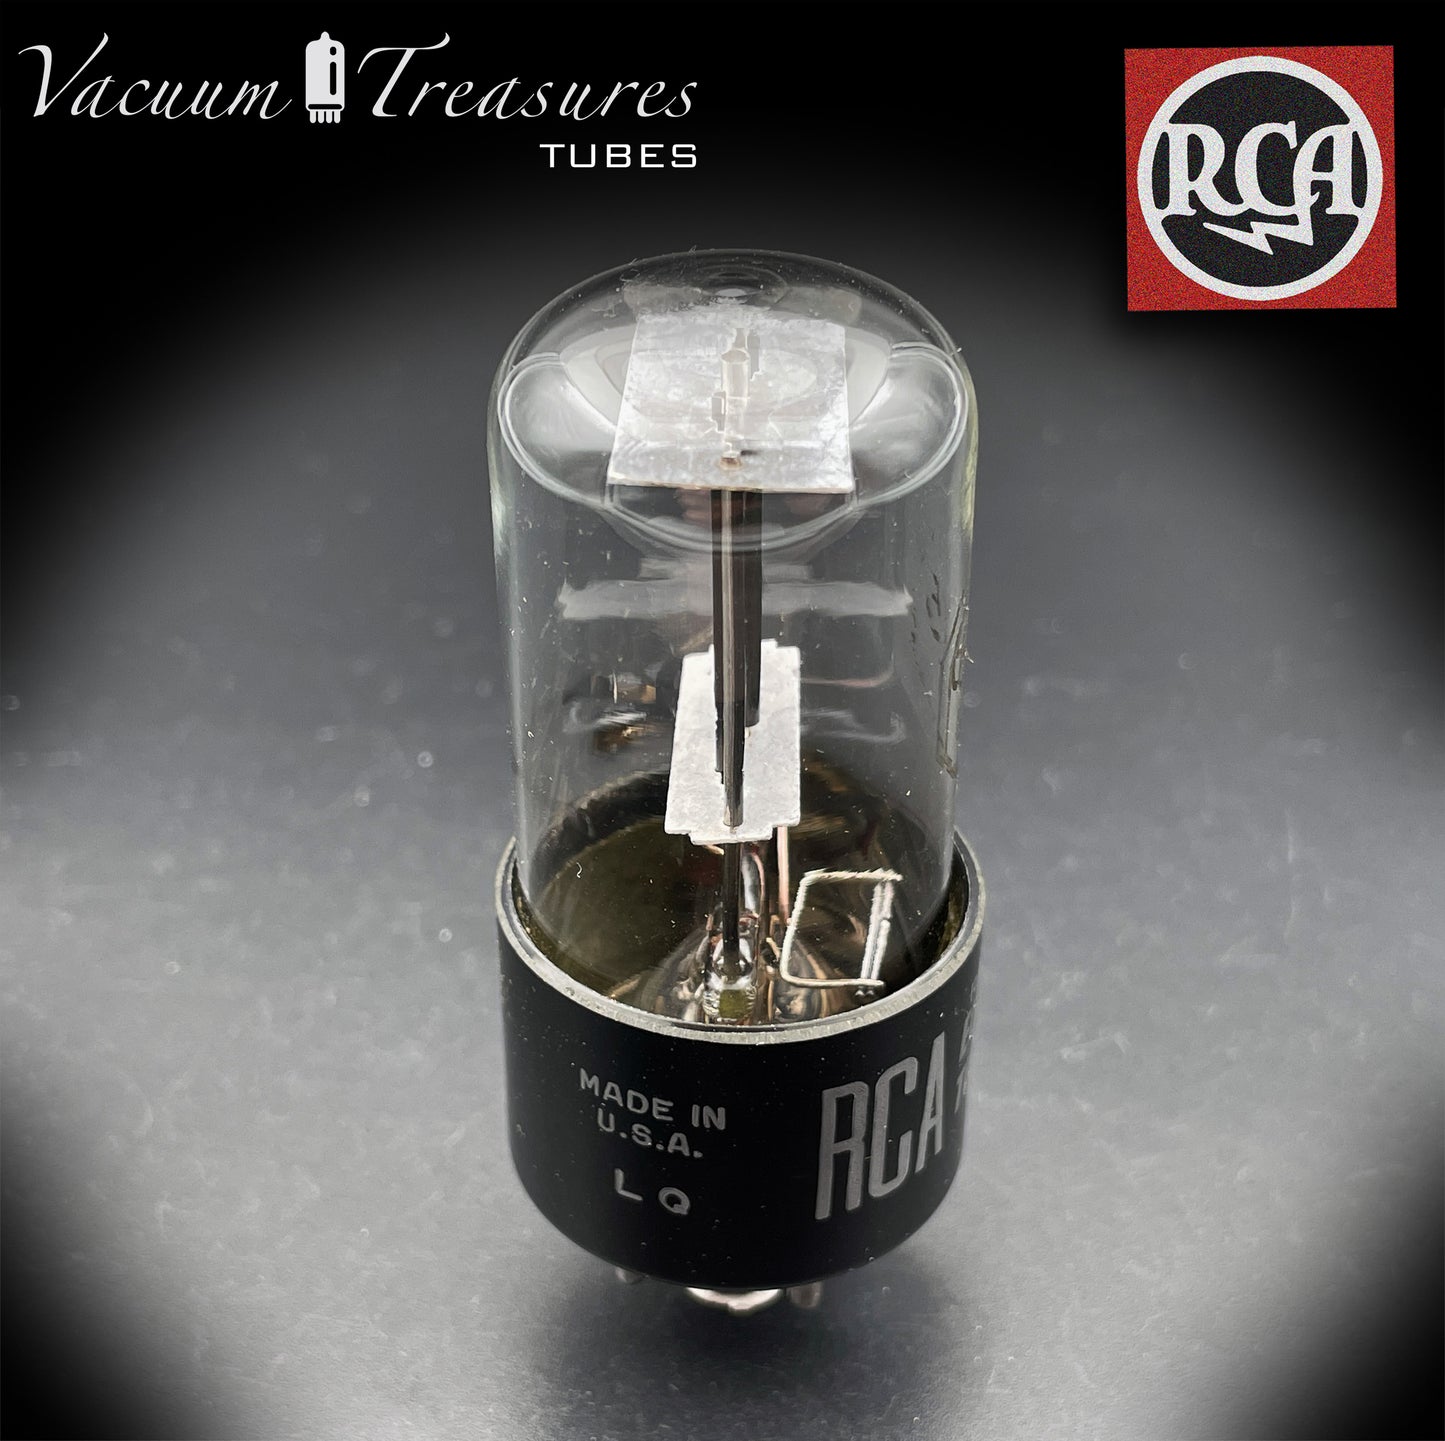 6X5 GT ( 6Z5P ) RCA NOS NIB Black Plates Square Getter Rectifier Tube MADE IN USA